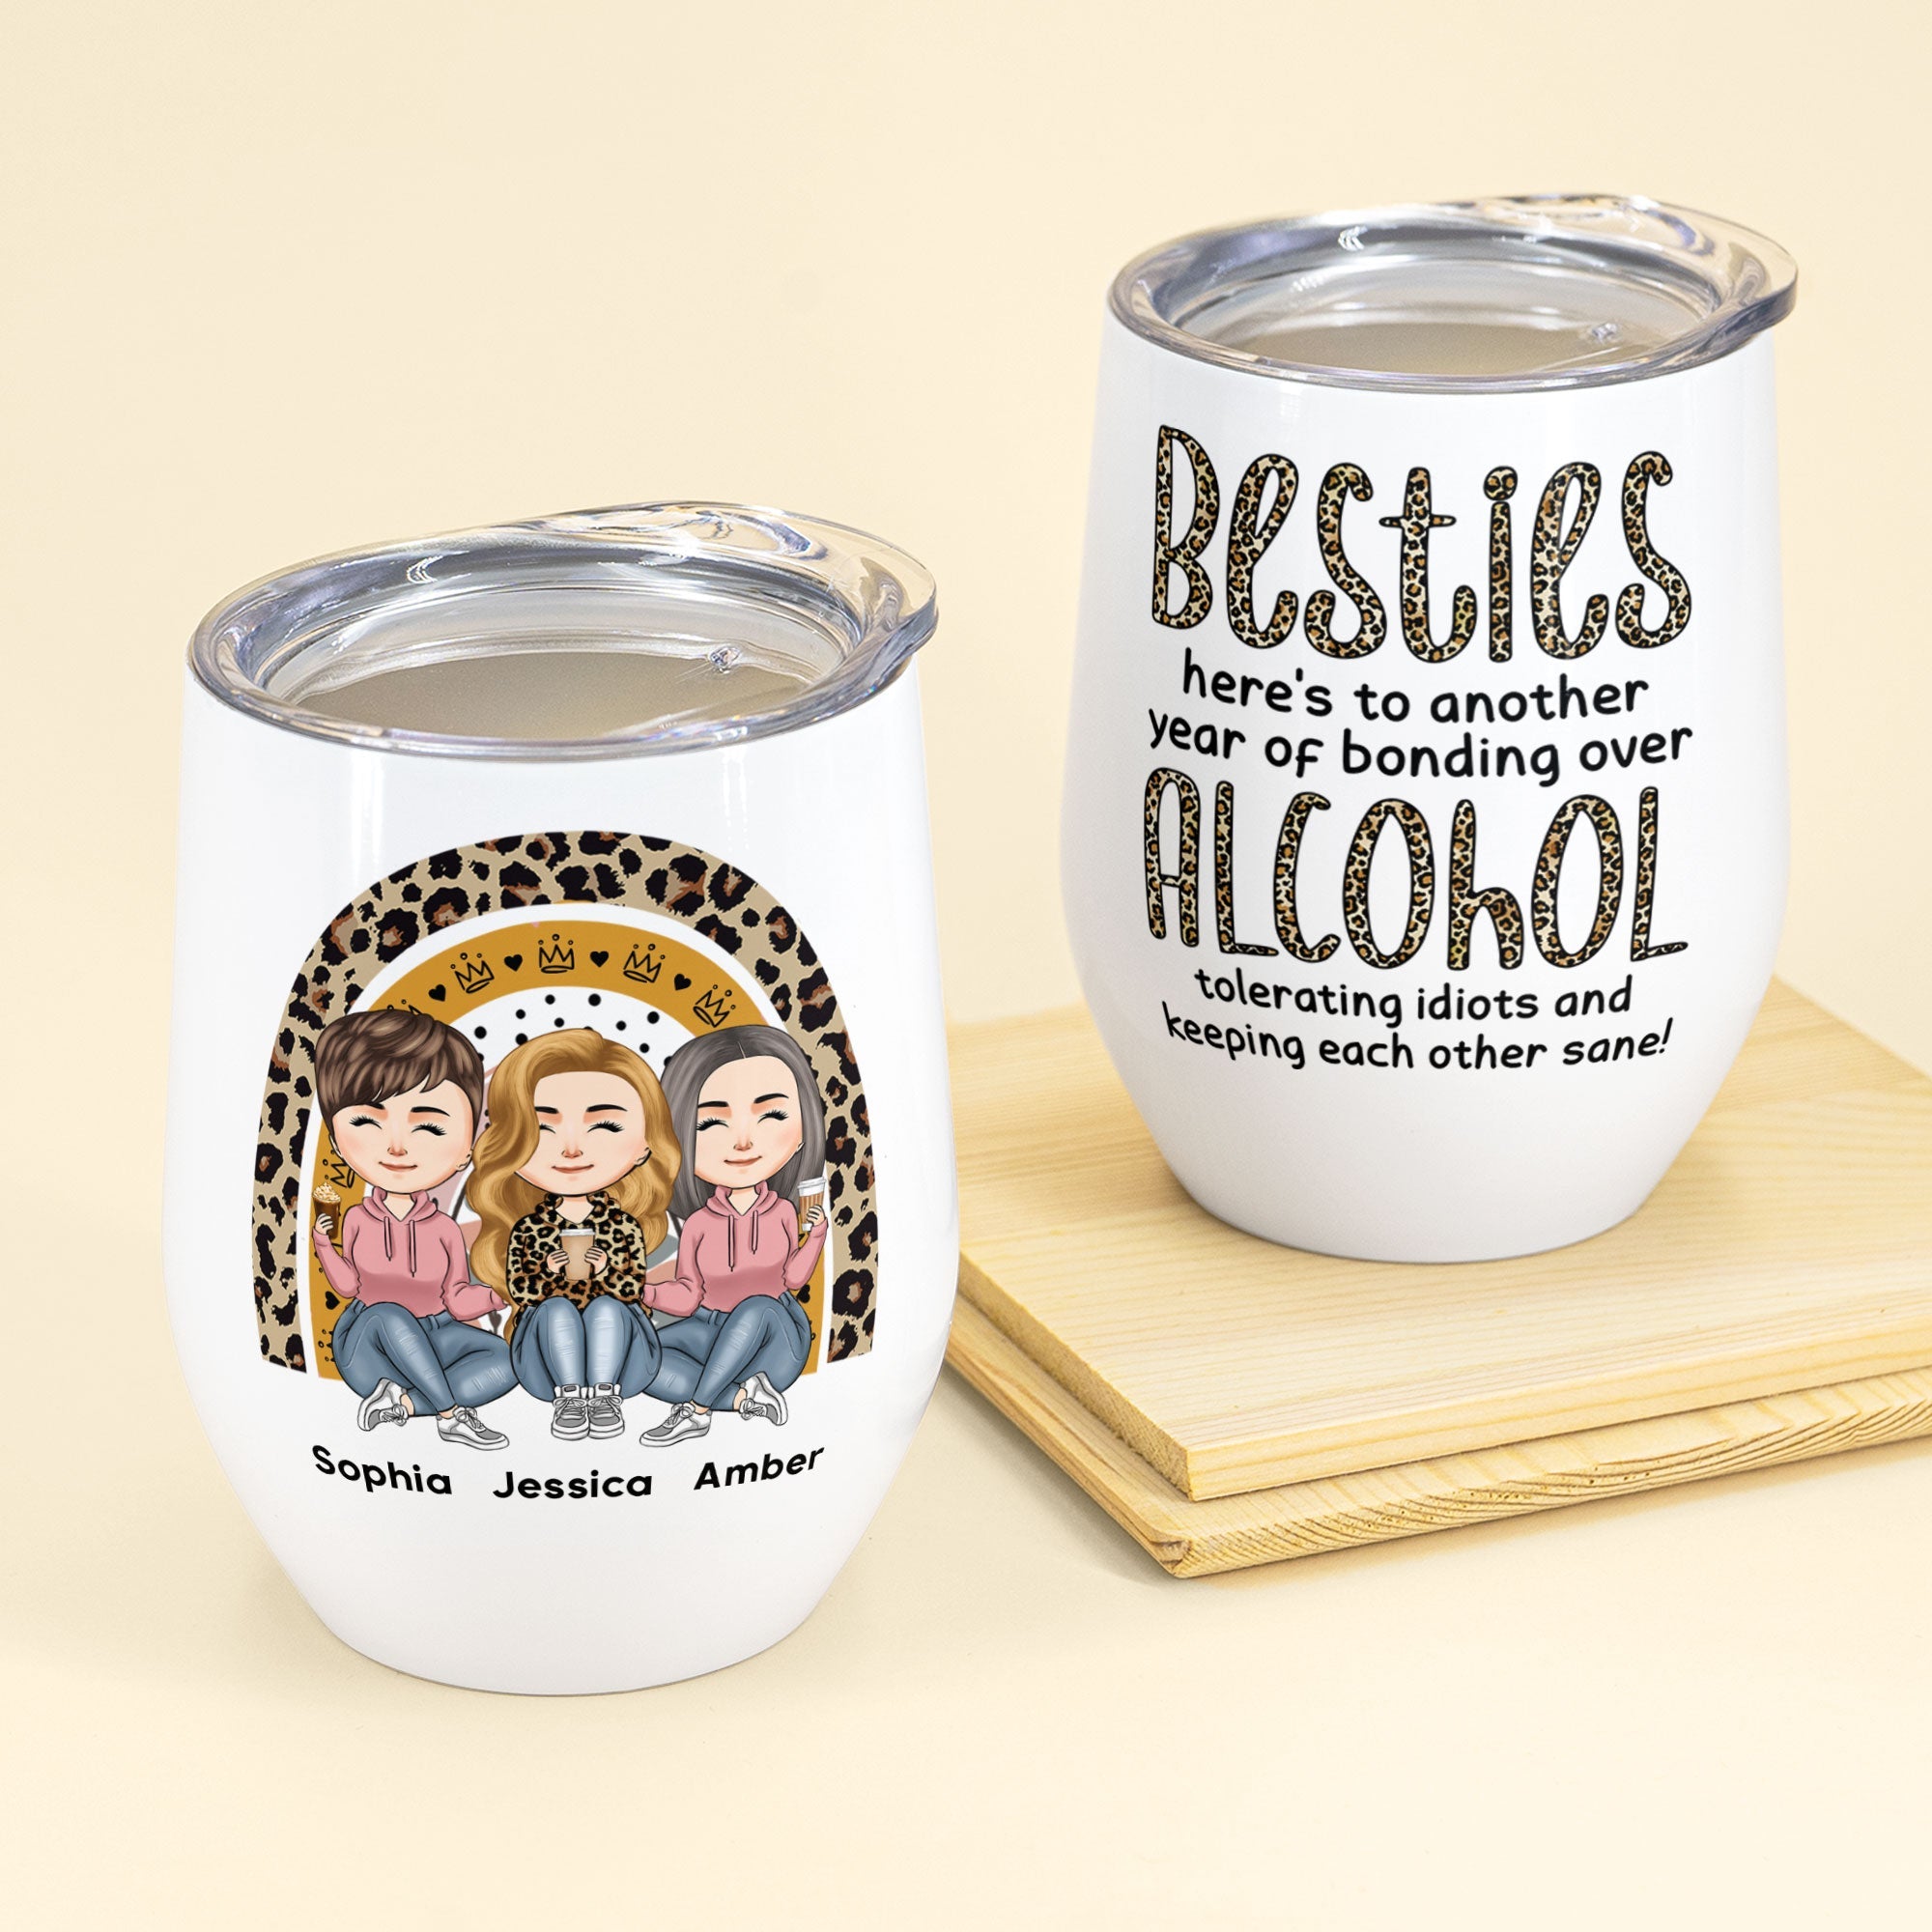 Besties AlcoholTolerating BondingOver Keeping Each Other Sane Personalized Wine Tumbler Birthday New Year Gifts For Best Friends Women 2